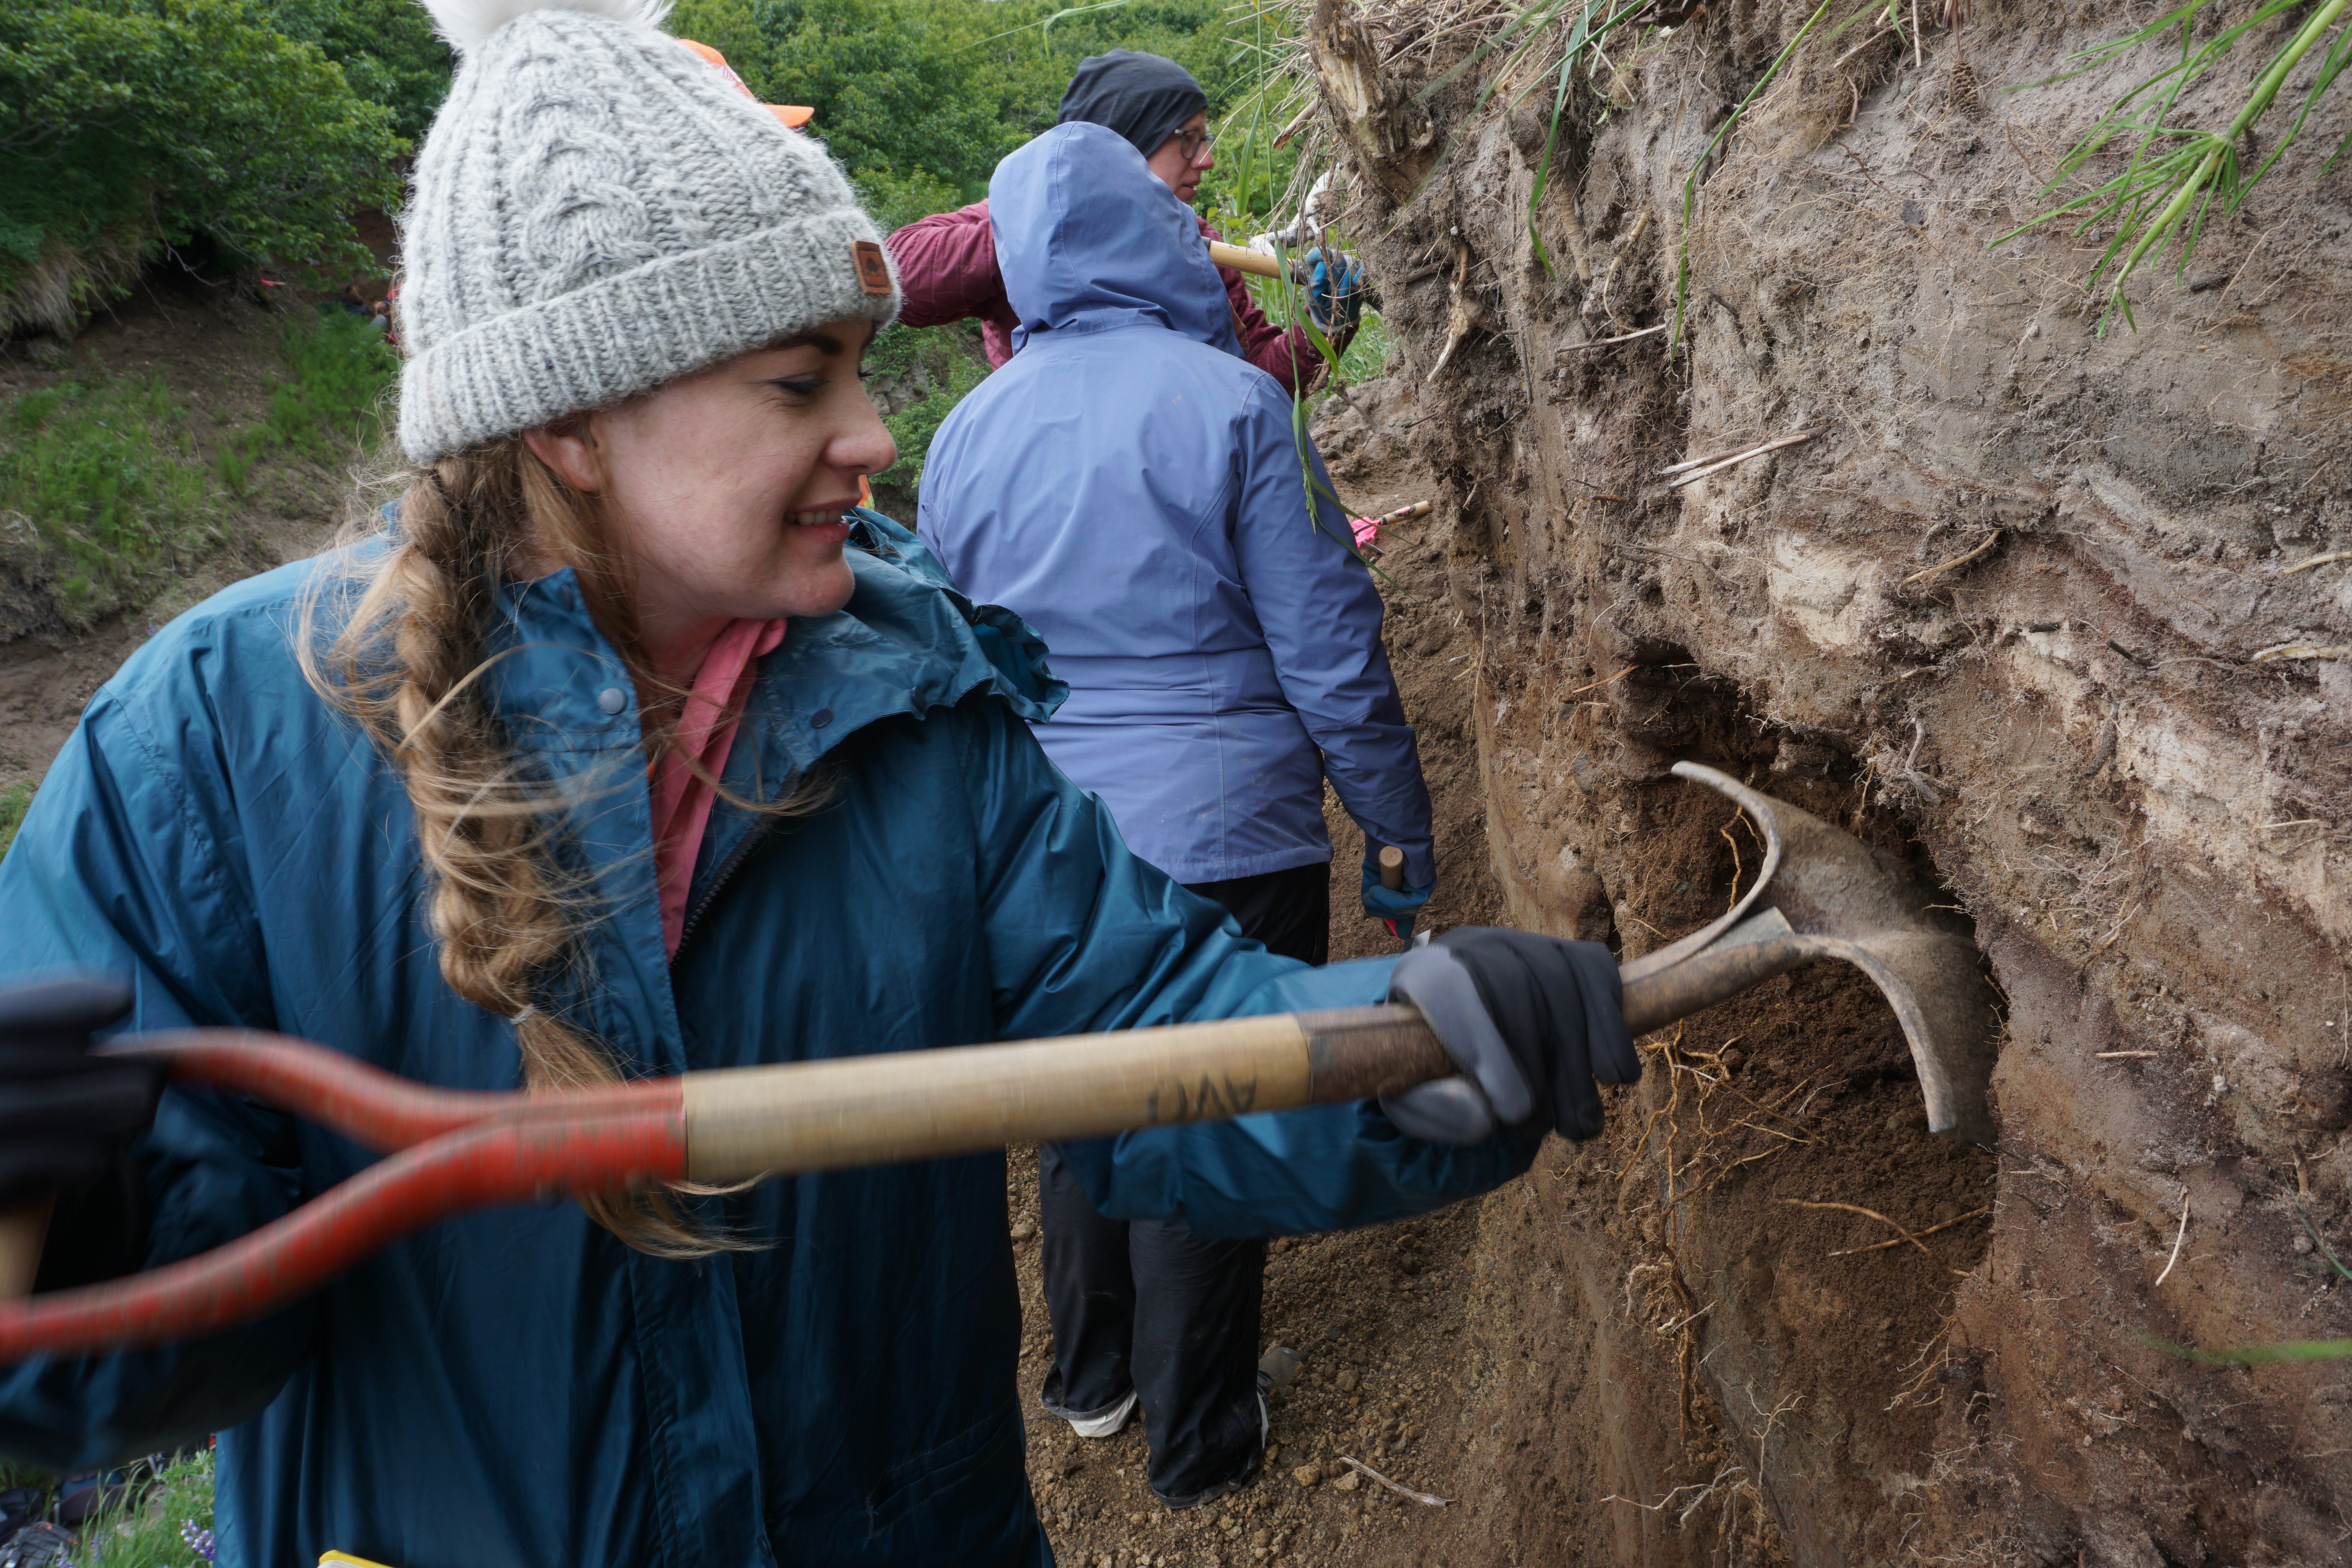 Sloane Kennedy uses a shovel to scrape dirt from an embankment.